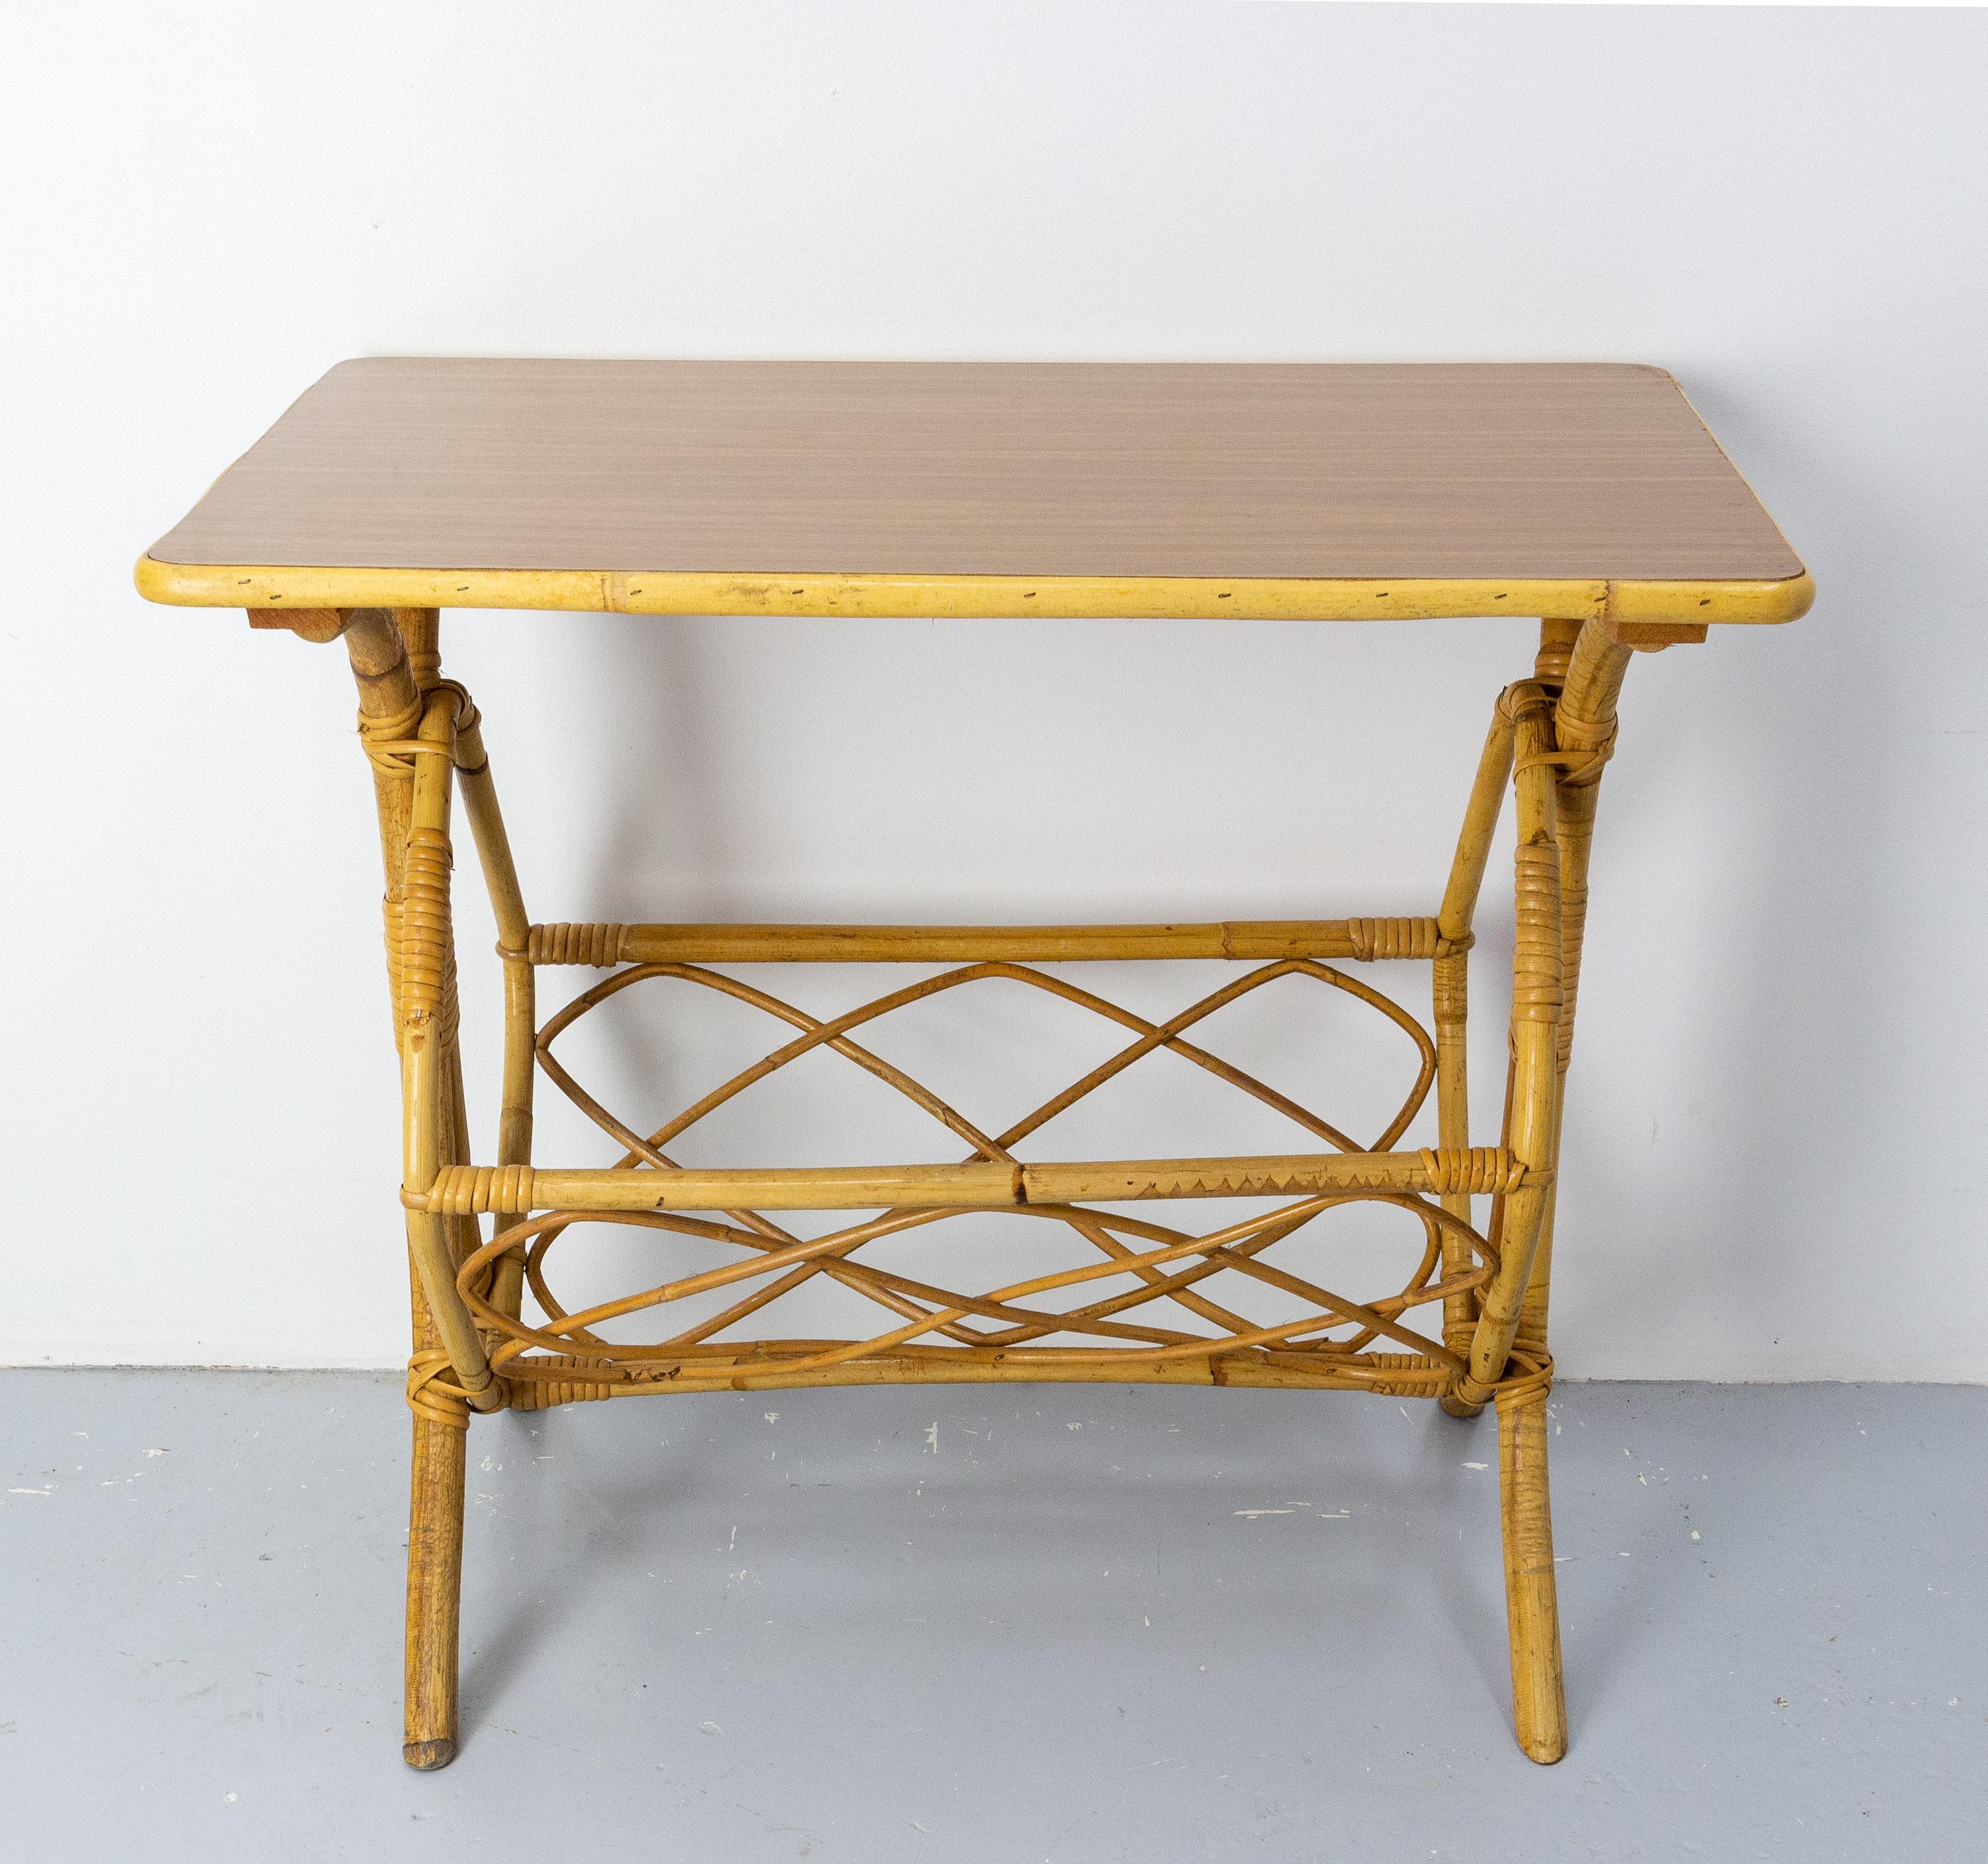 Rattan side table, laminated top wood imitation 
French, circa 1970
Very good condition

Shipping: 42 x 71.5 x 61 cm 4.4 kg.